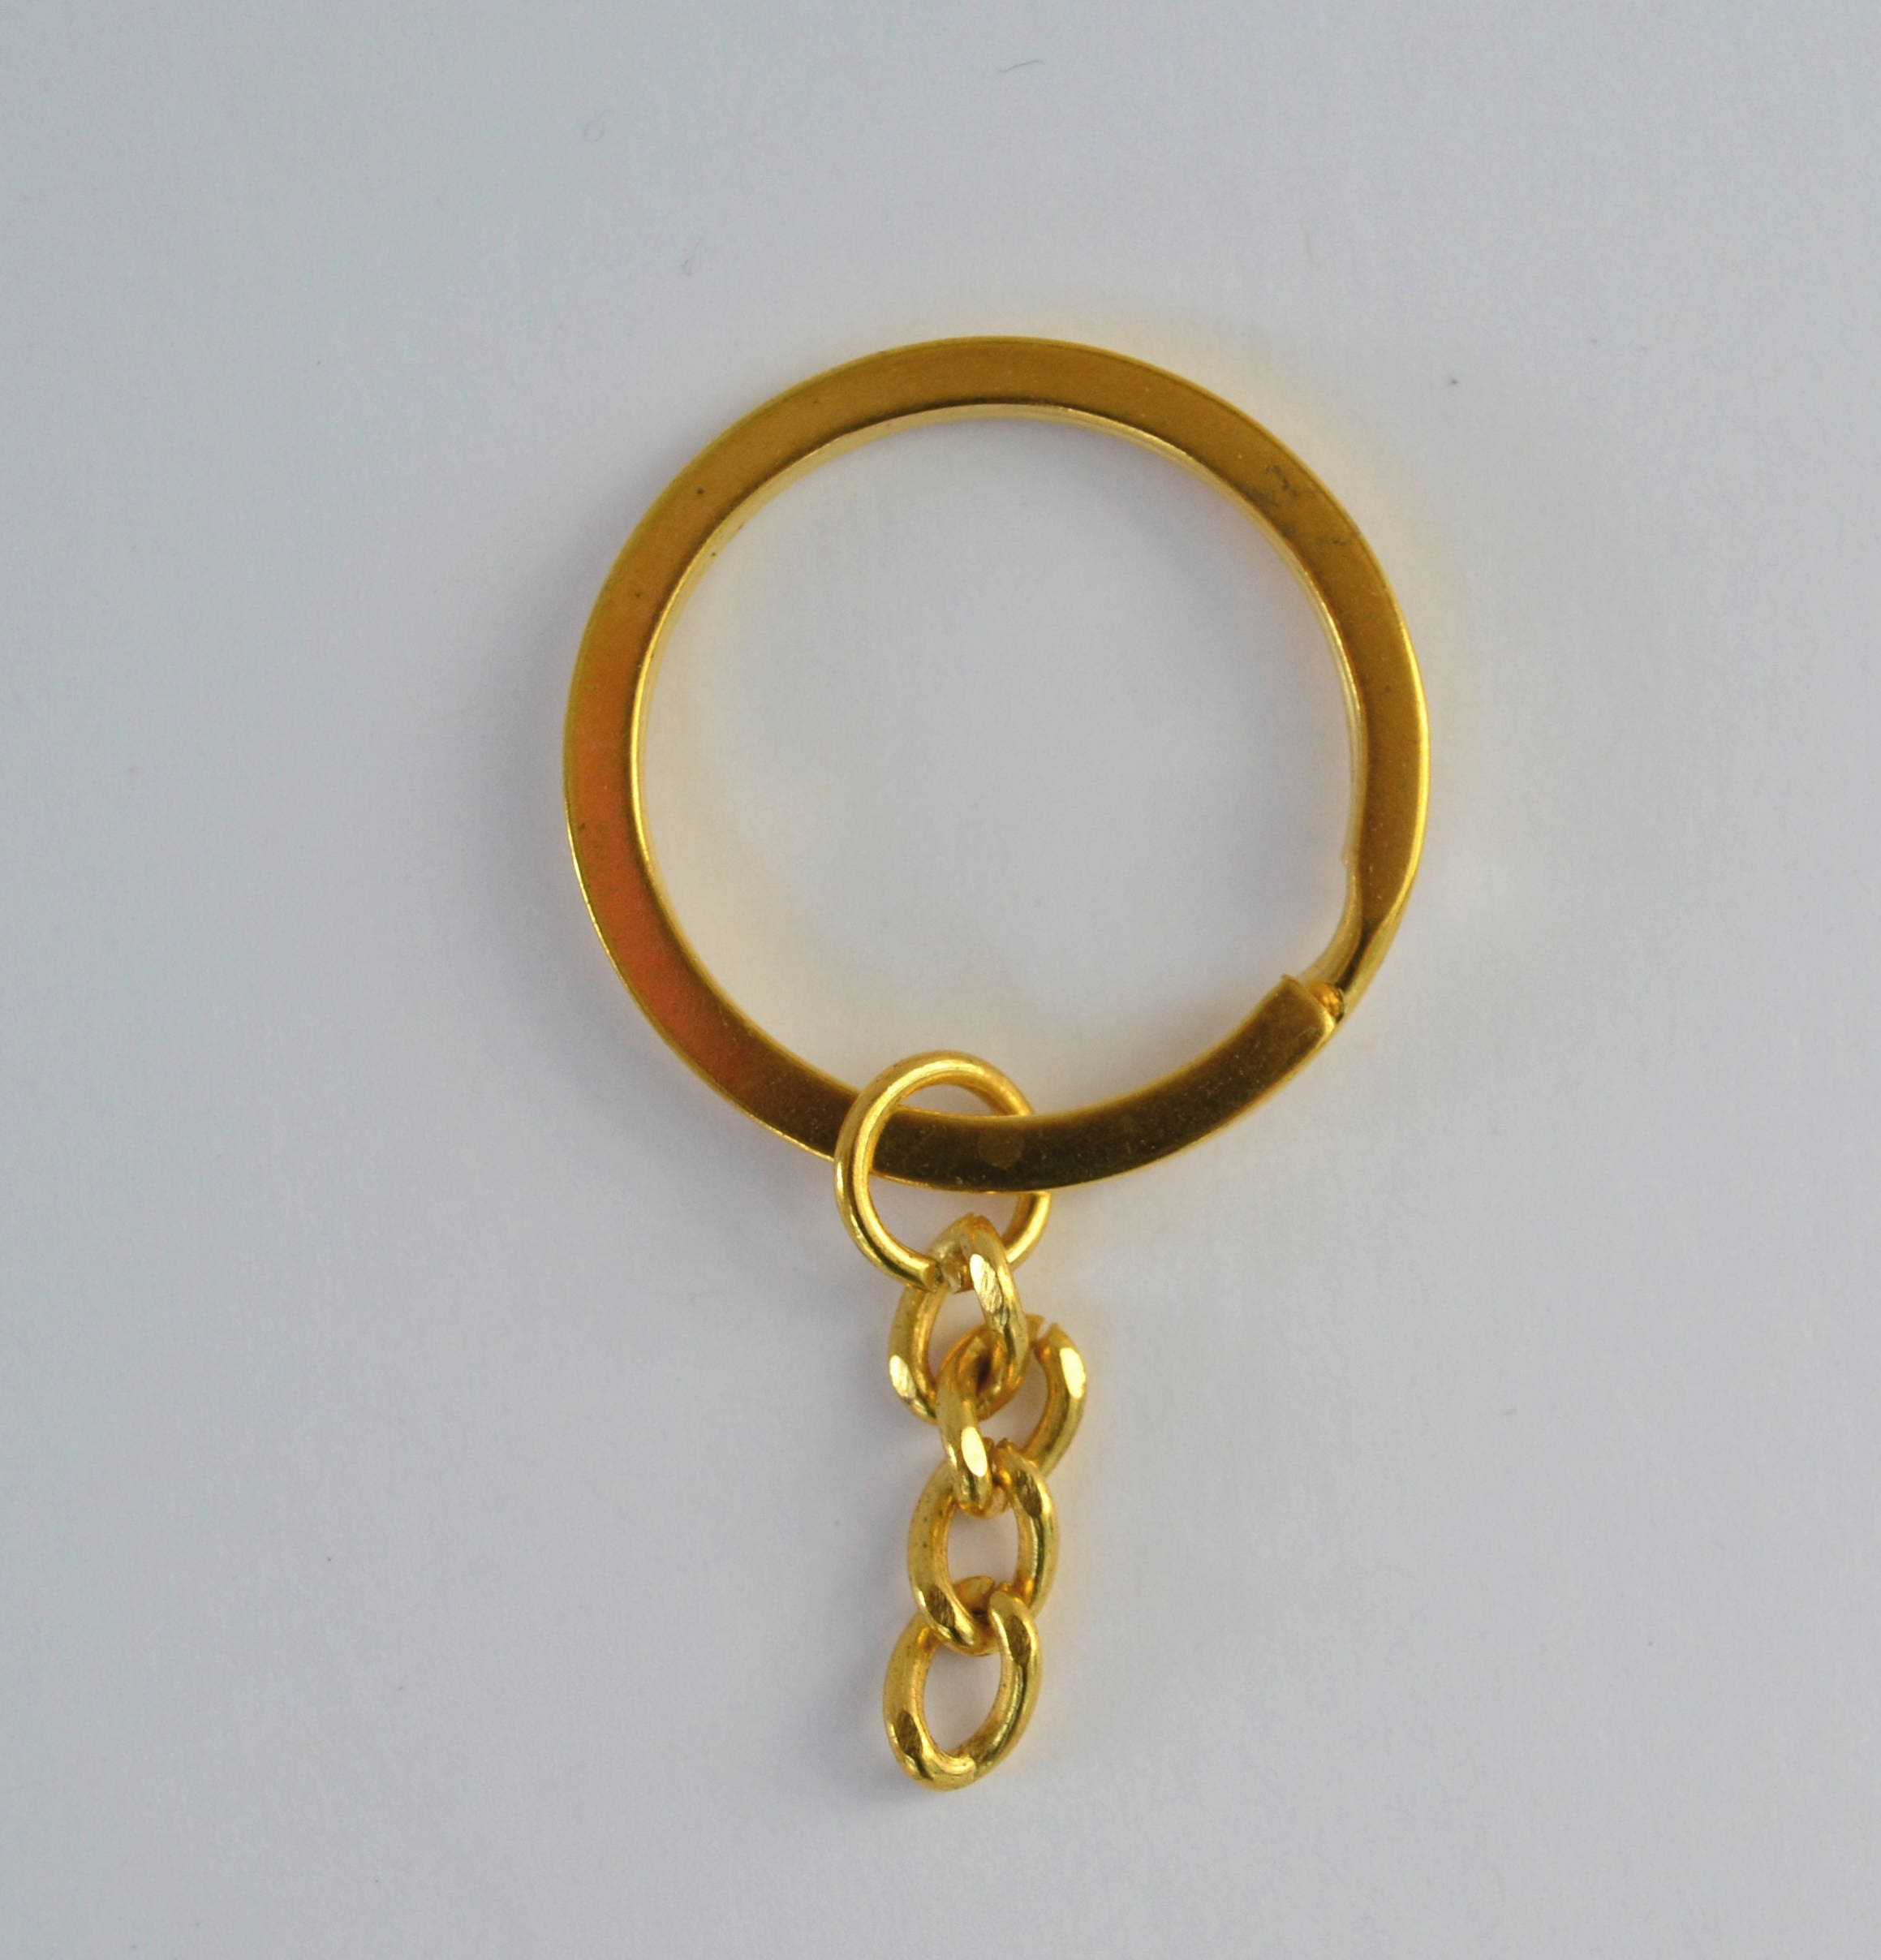 24mm gold or nickel plated split ring/ key ring/ key chain rings, 500 – My  Supplies Source